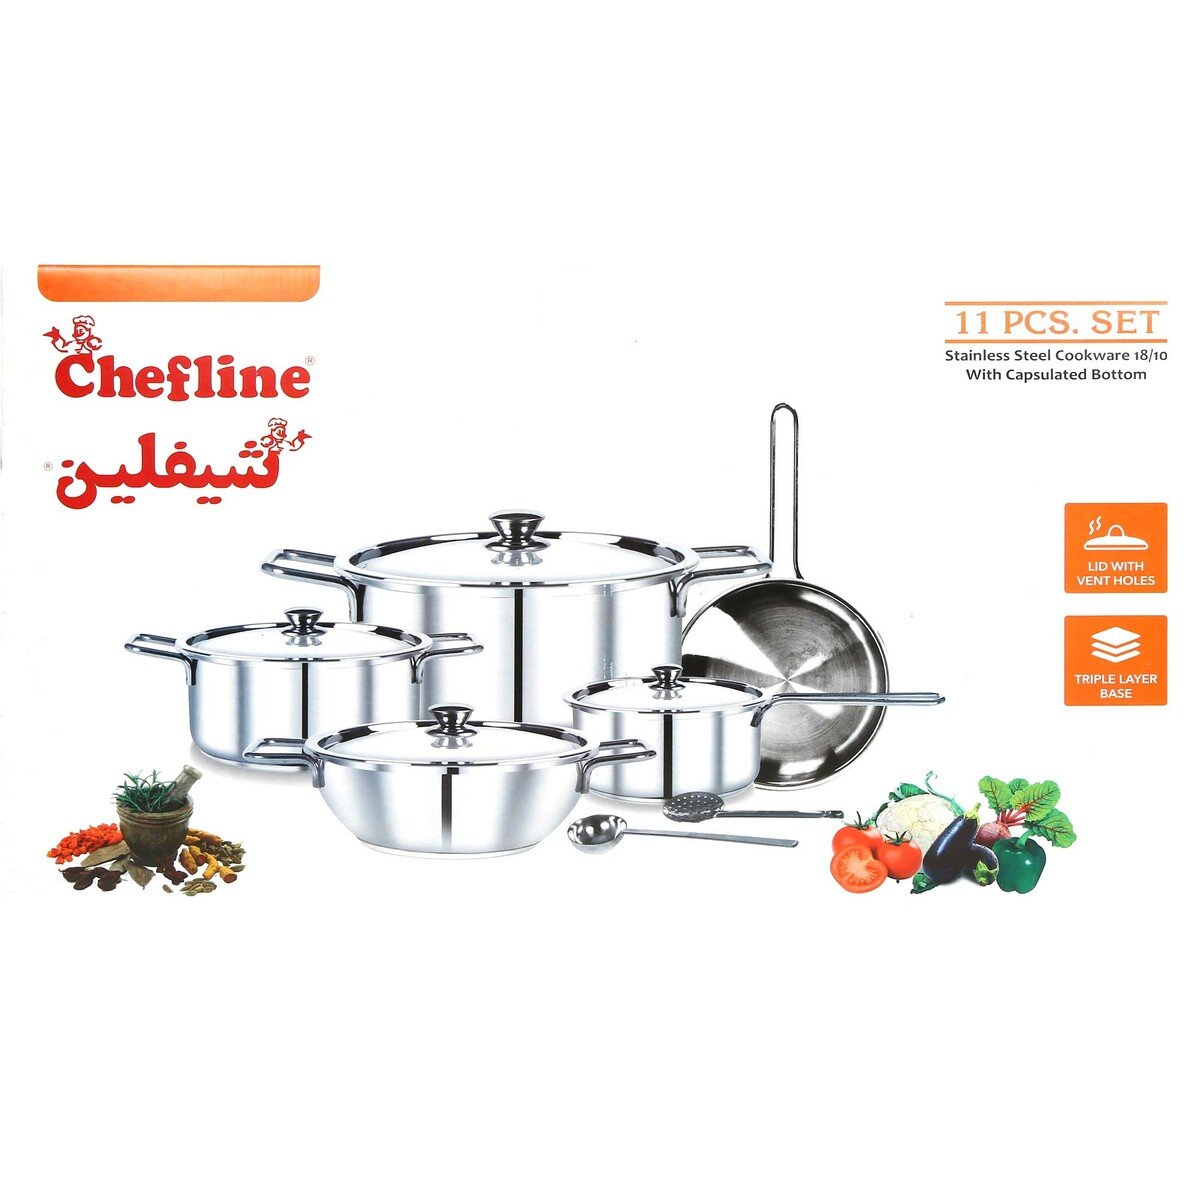 Chefline Stainless Steel Cookware Set 11pcs IND